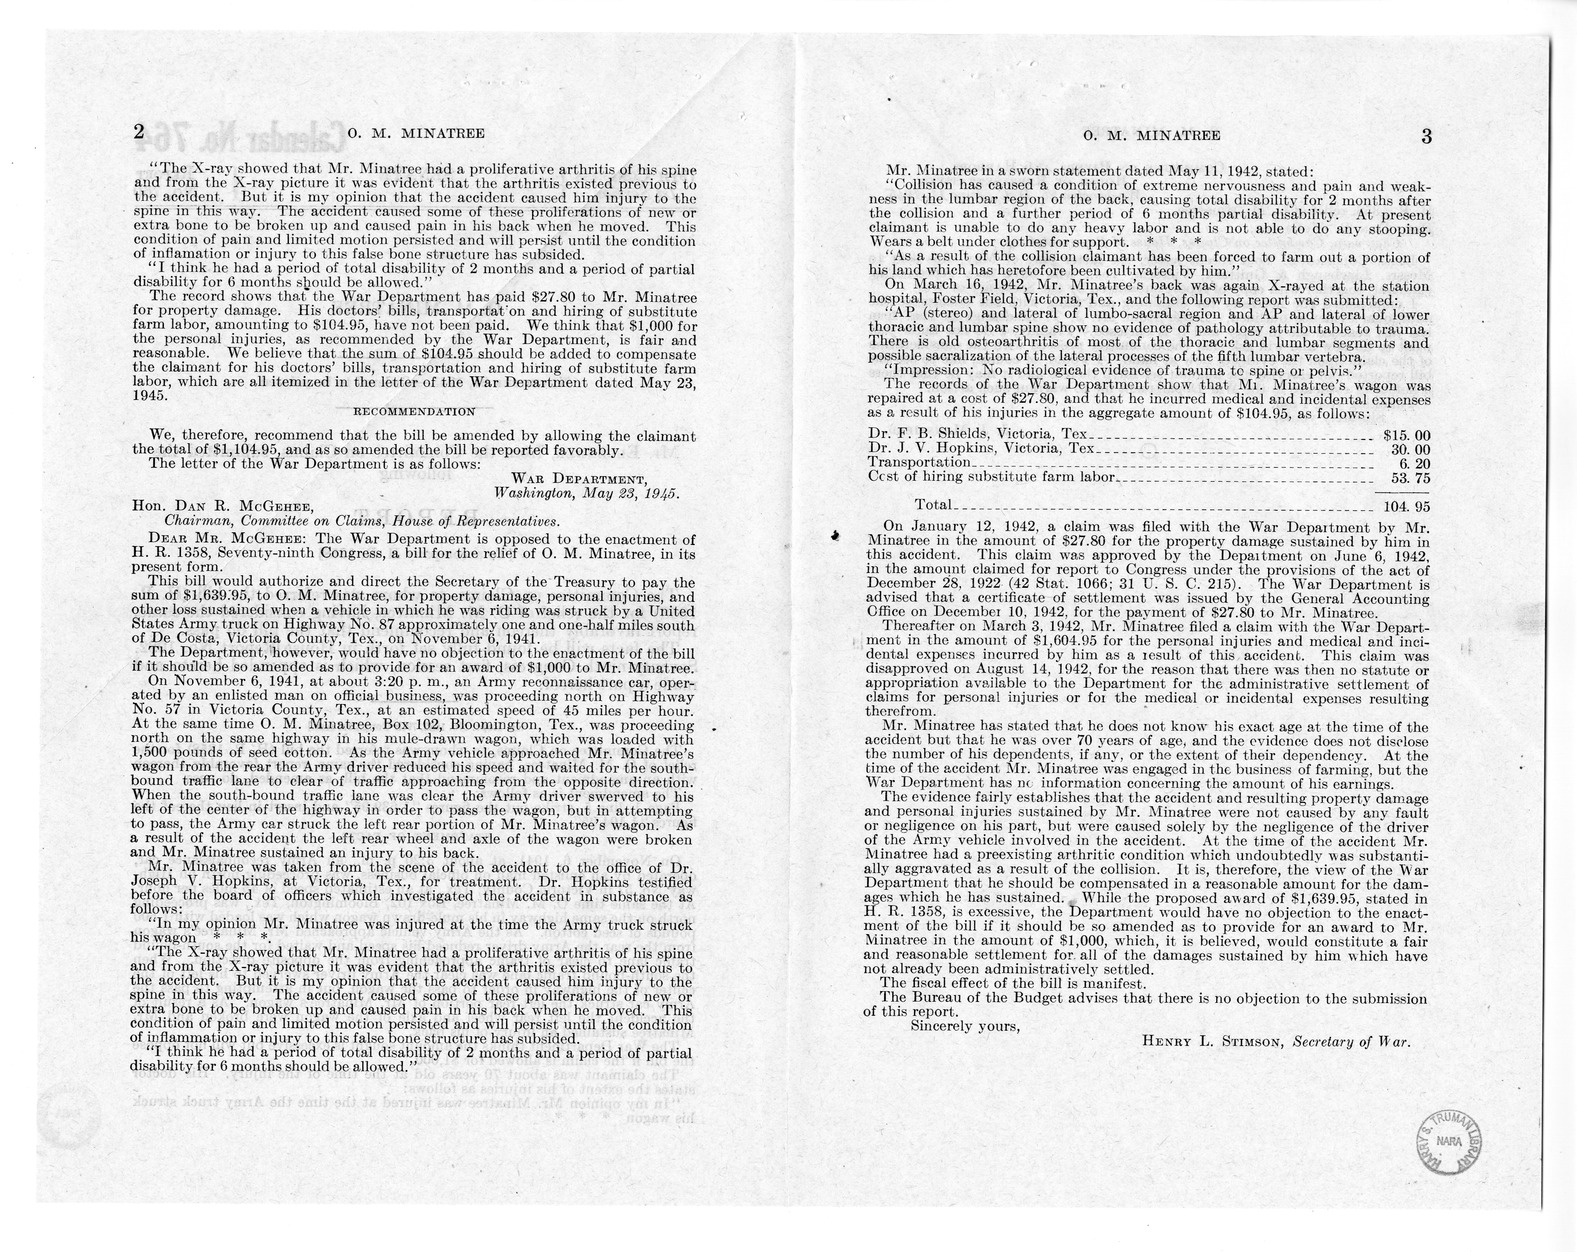 Memorandum from Frederick J. Bailey to M. C. Latta, H.R. 1358, For the Relief of O. M. Minatree, with Attachments